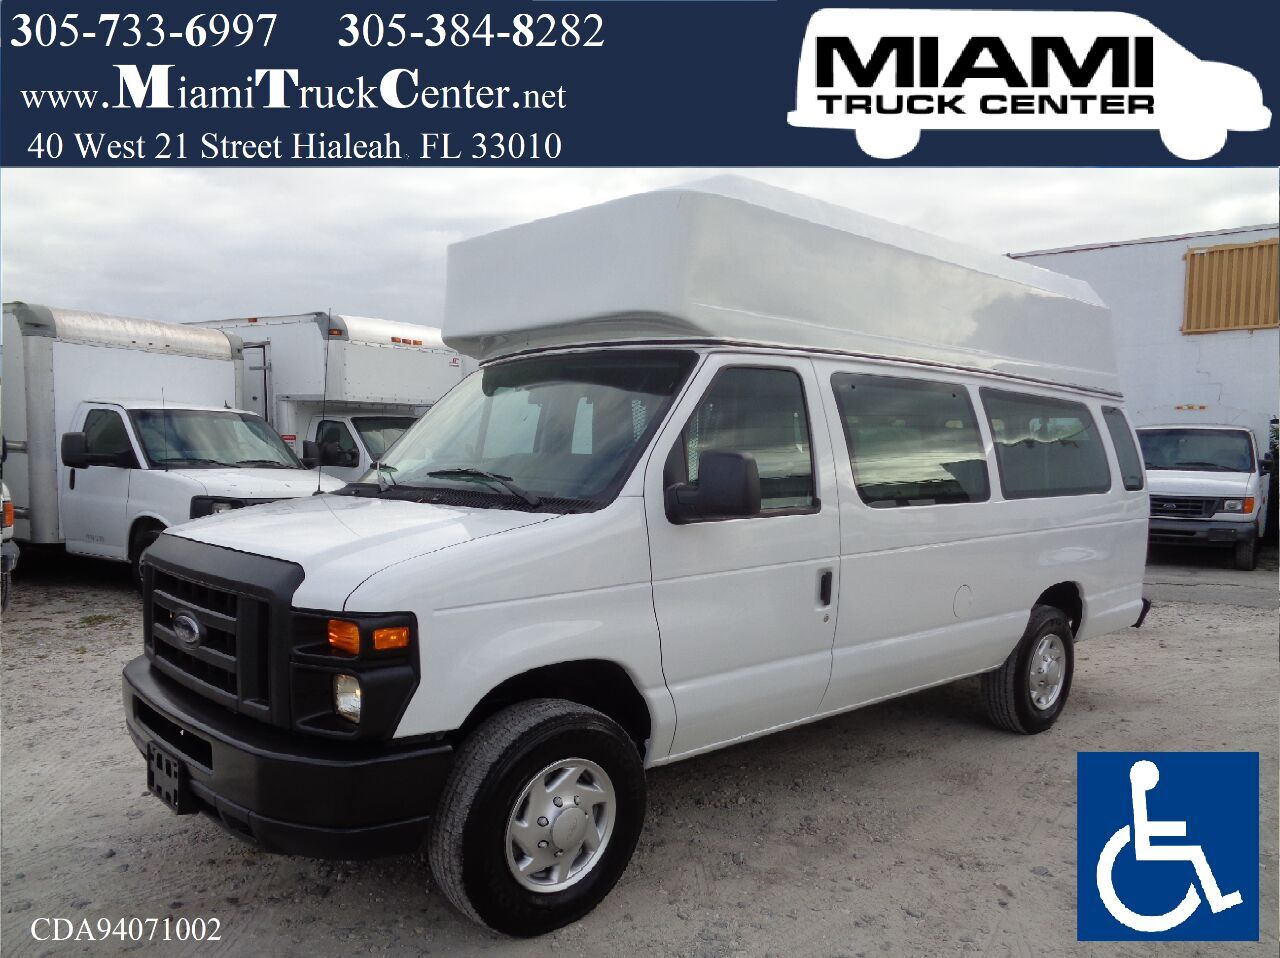 Used Ford E-350 For Sale - Carsforsale.com®